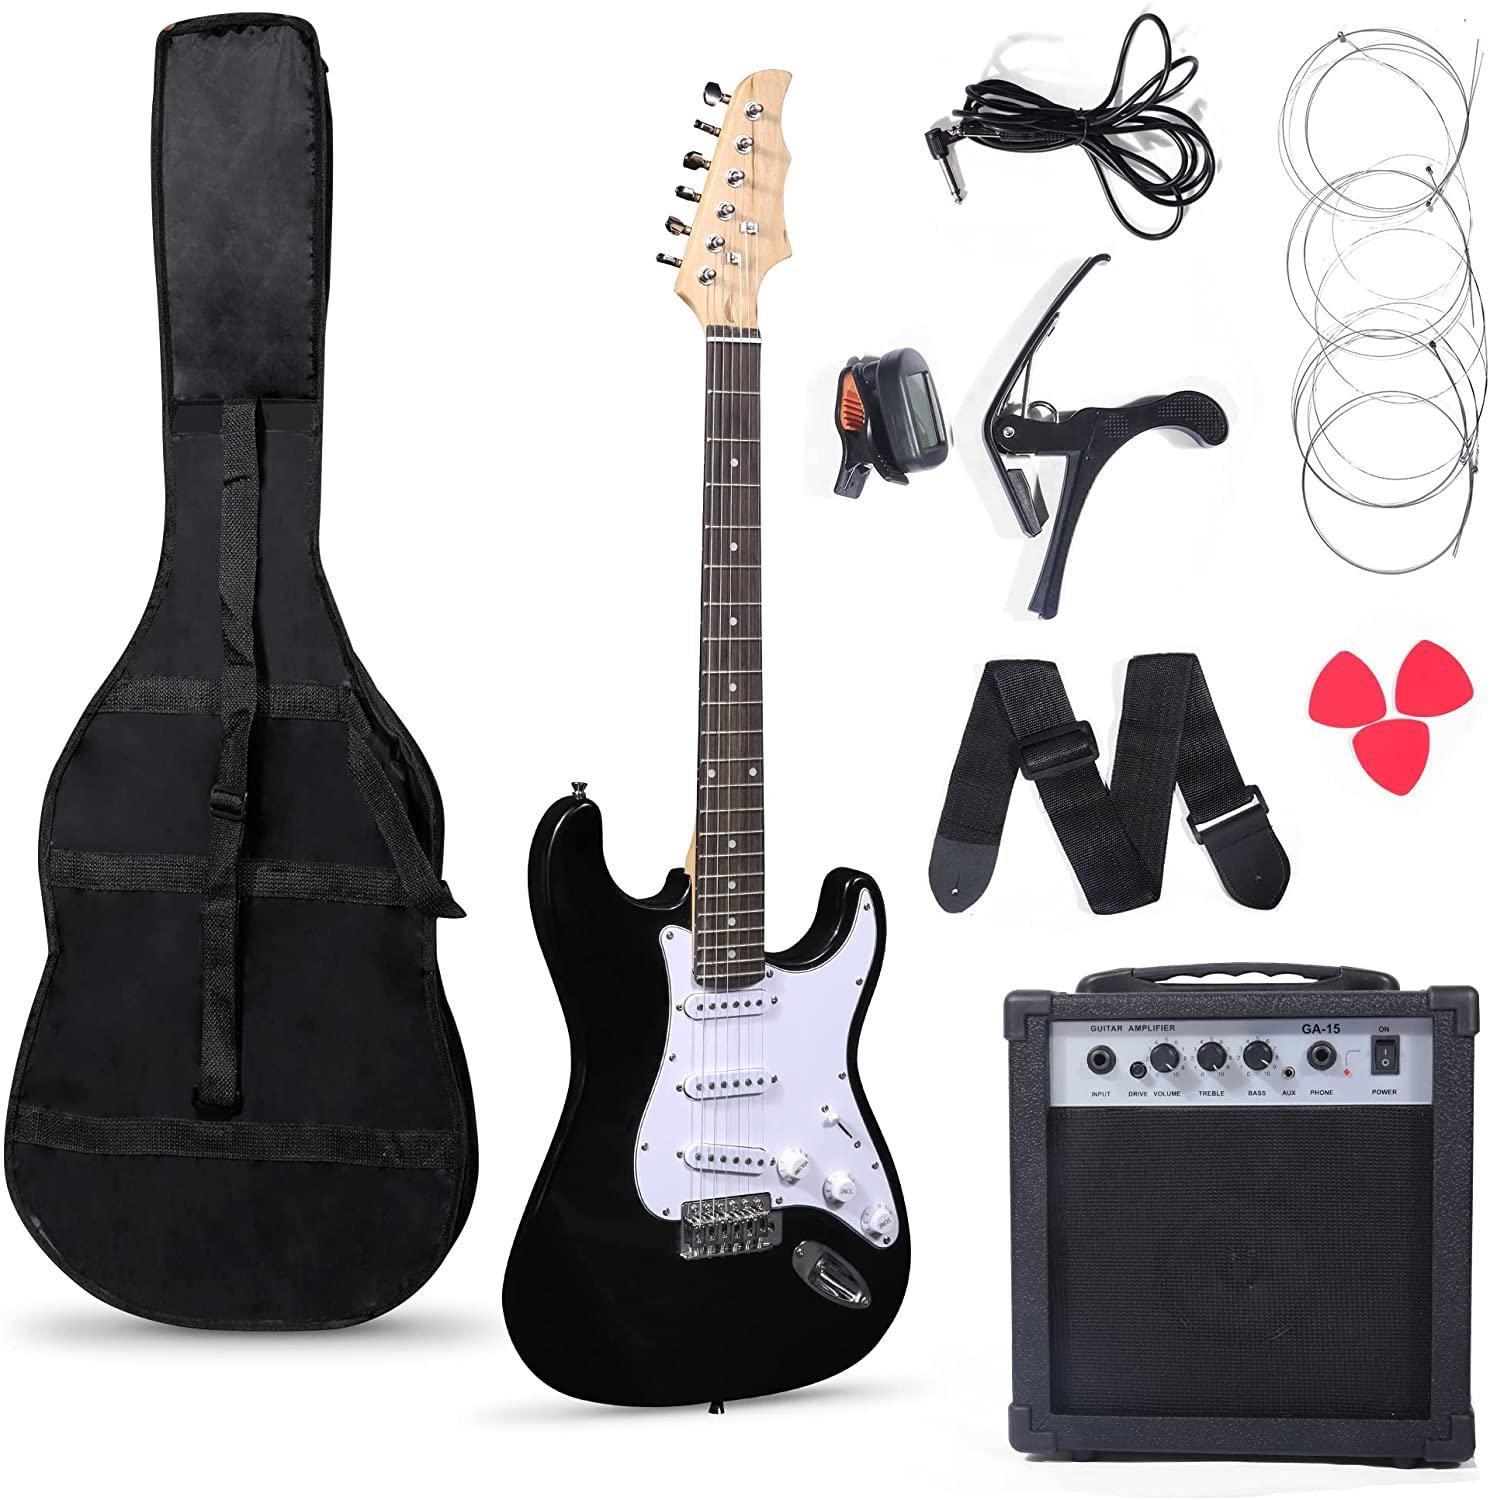 Electric guitar set with accessories